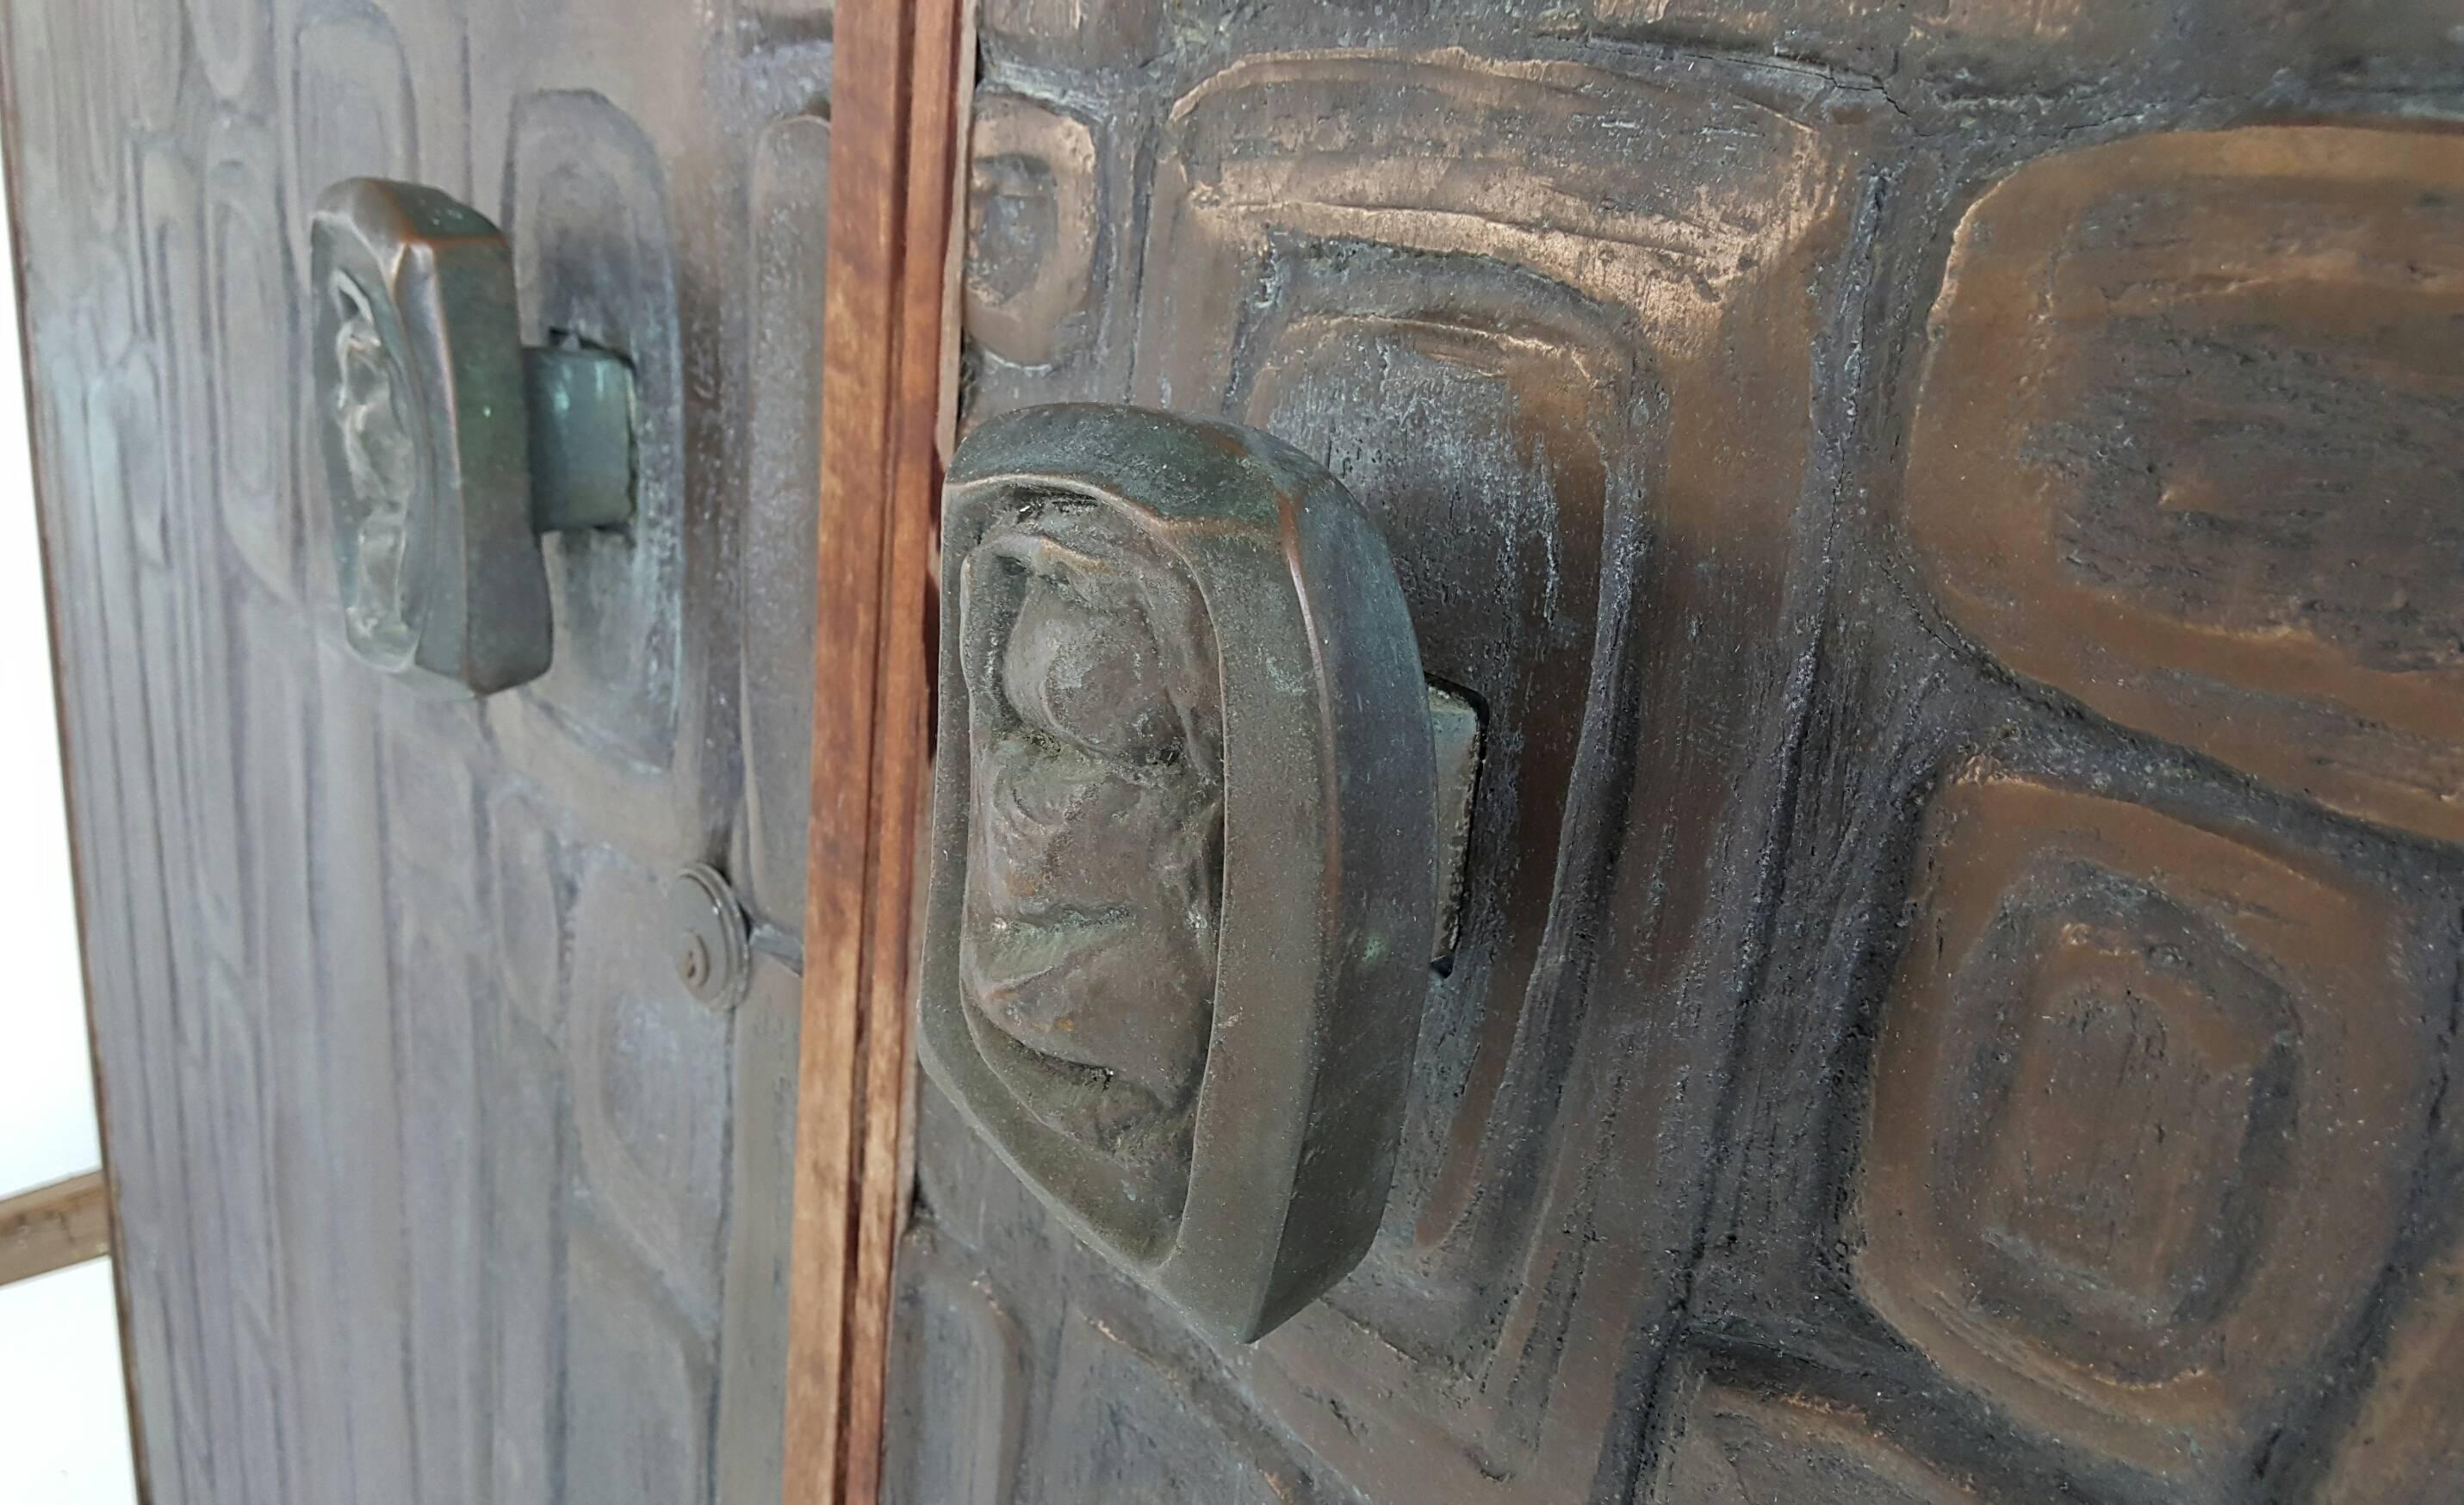 Teak Rare Pair of Bonded Bronze Doors, Style of Forms and Surfaces, Brutalist Design